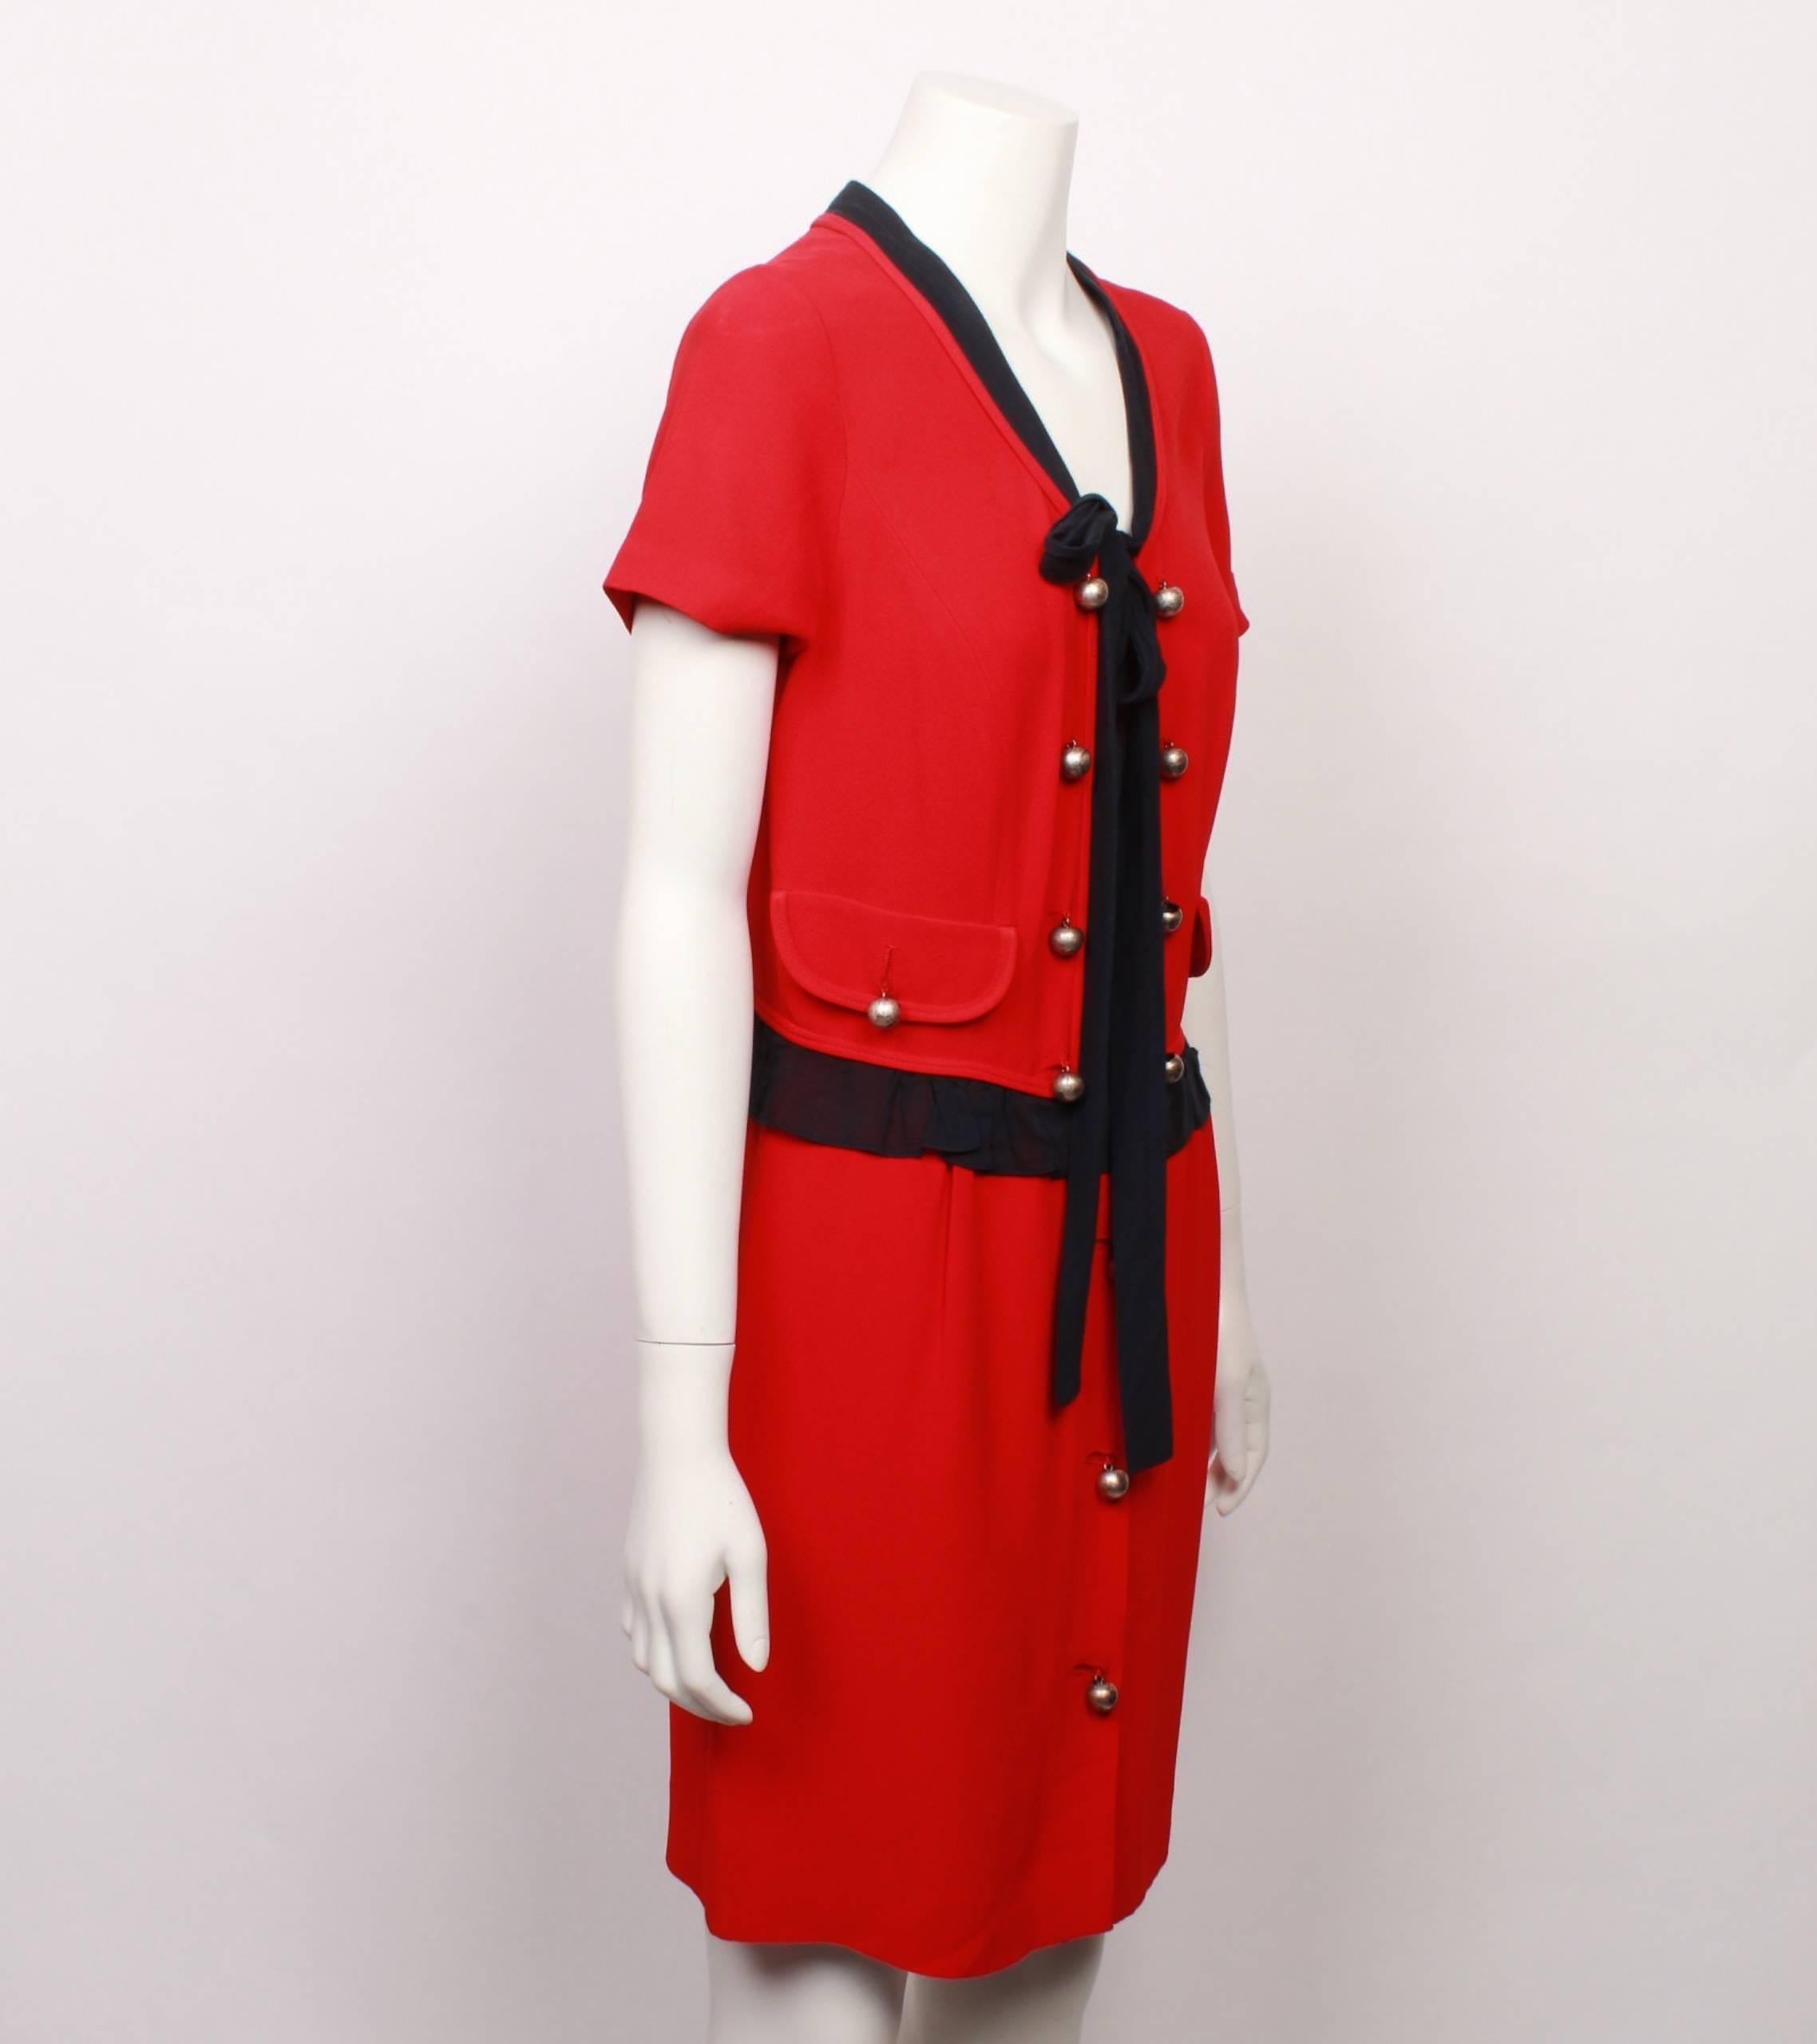 Moschino Cheap and Chic Chanel style red and black double crepe dress features cute contrasting black trim, pussy bow tie and soft frill around the waistline. 
The loose fitting bodice has 2 curved flap pockets, and is decorated with nickel domed